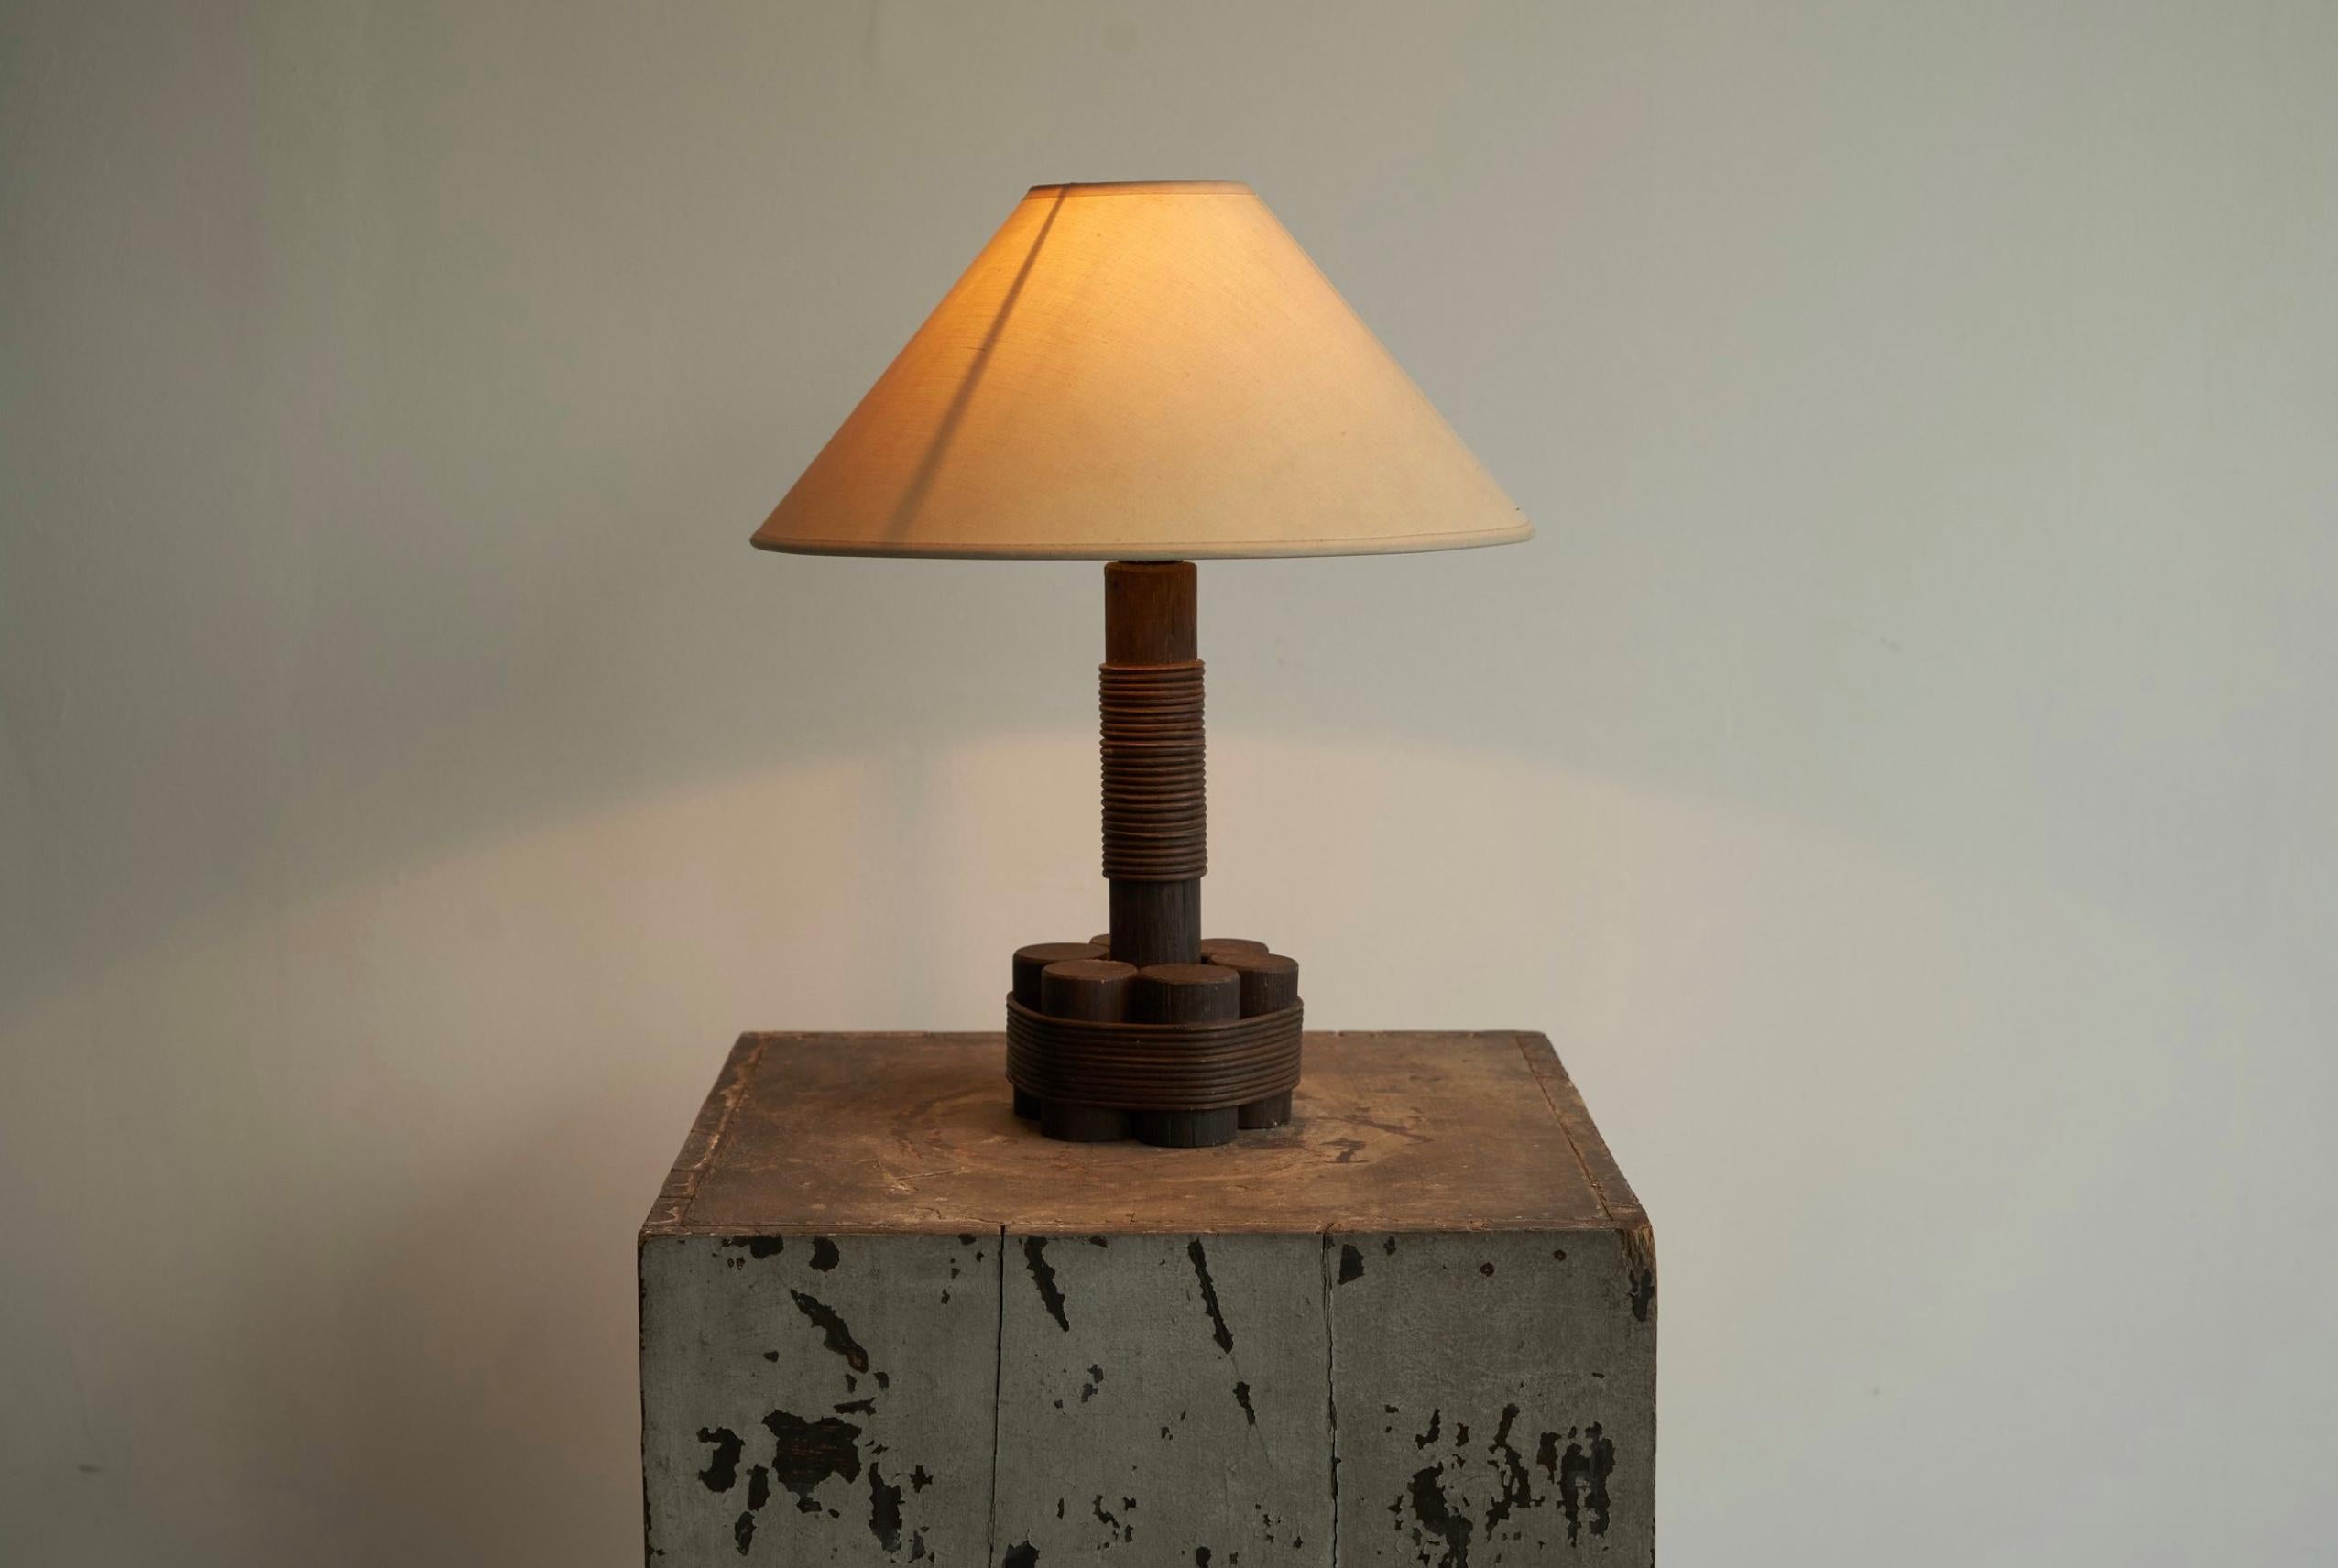 Table Lamp in Bamboo and Rattan 1970s.

Great and very atmospheric table lamp in bamboo and rattan, made somewhere in the 1970s. 

The lamp features a simple, but very sophisticated design with only a few pieces of bamboo which is being kept